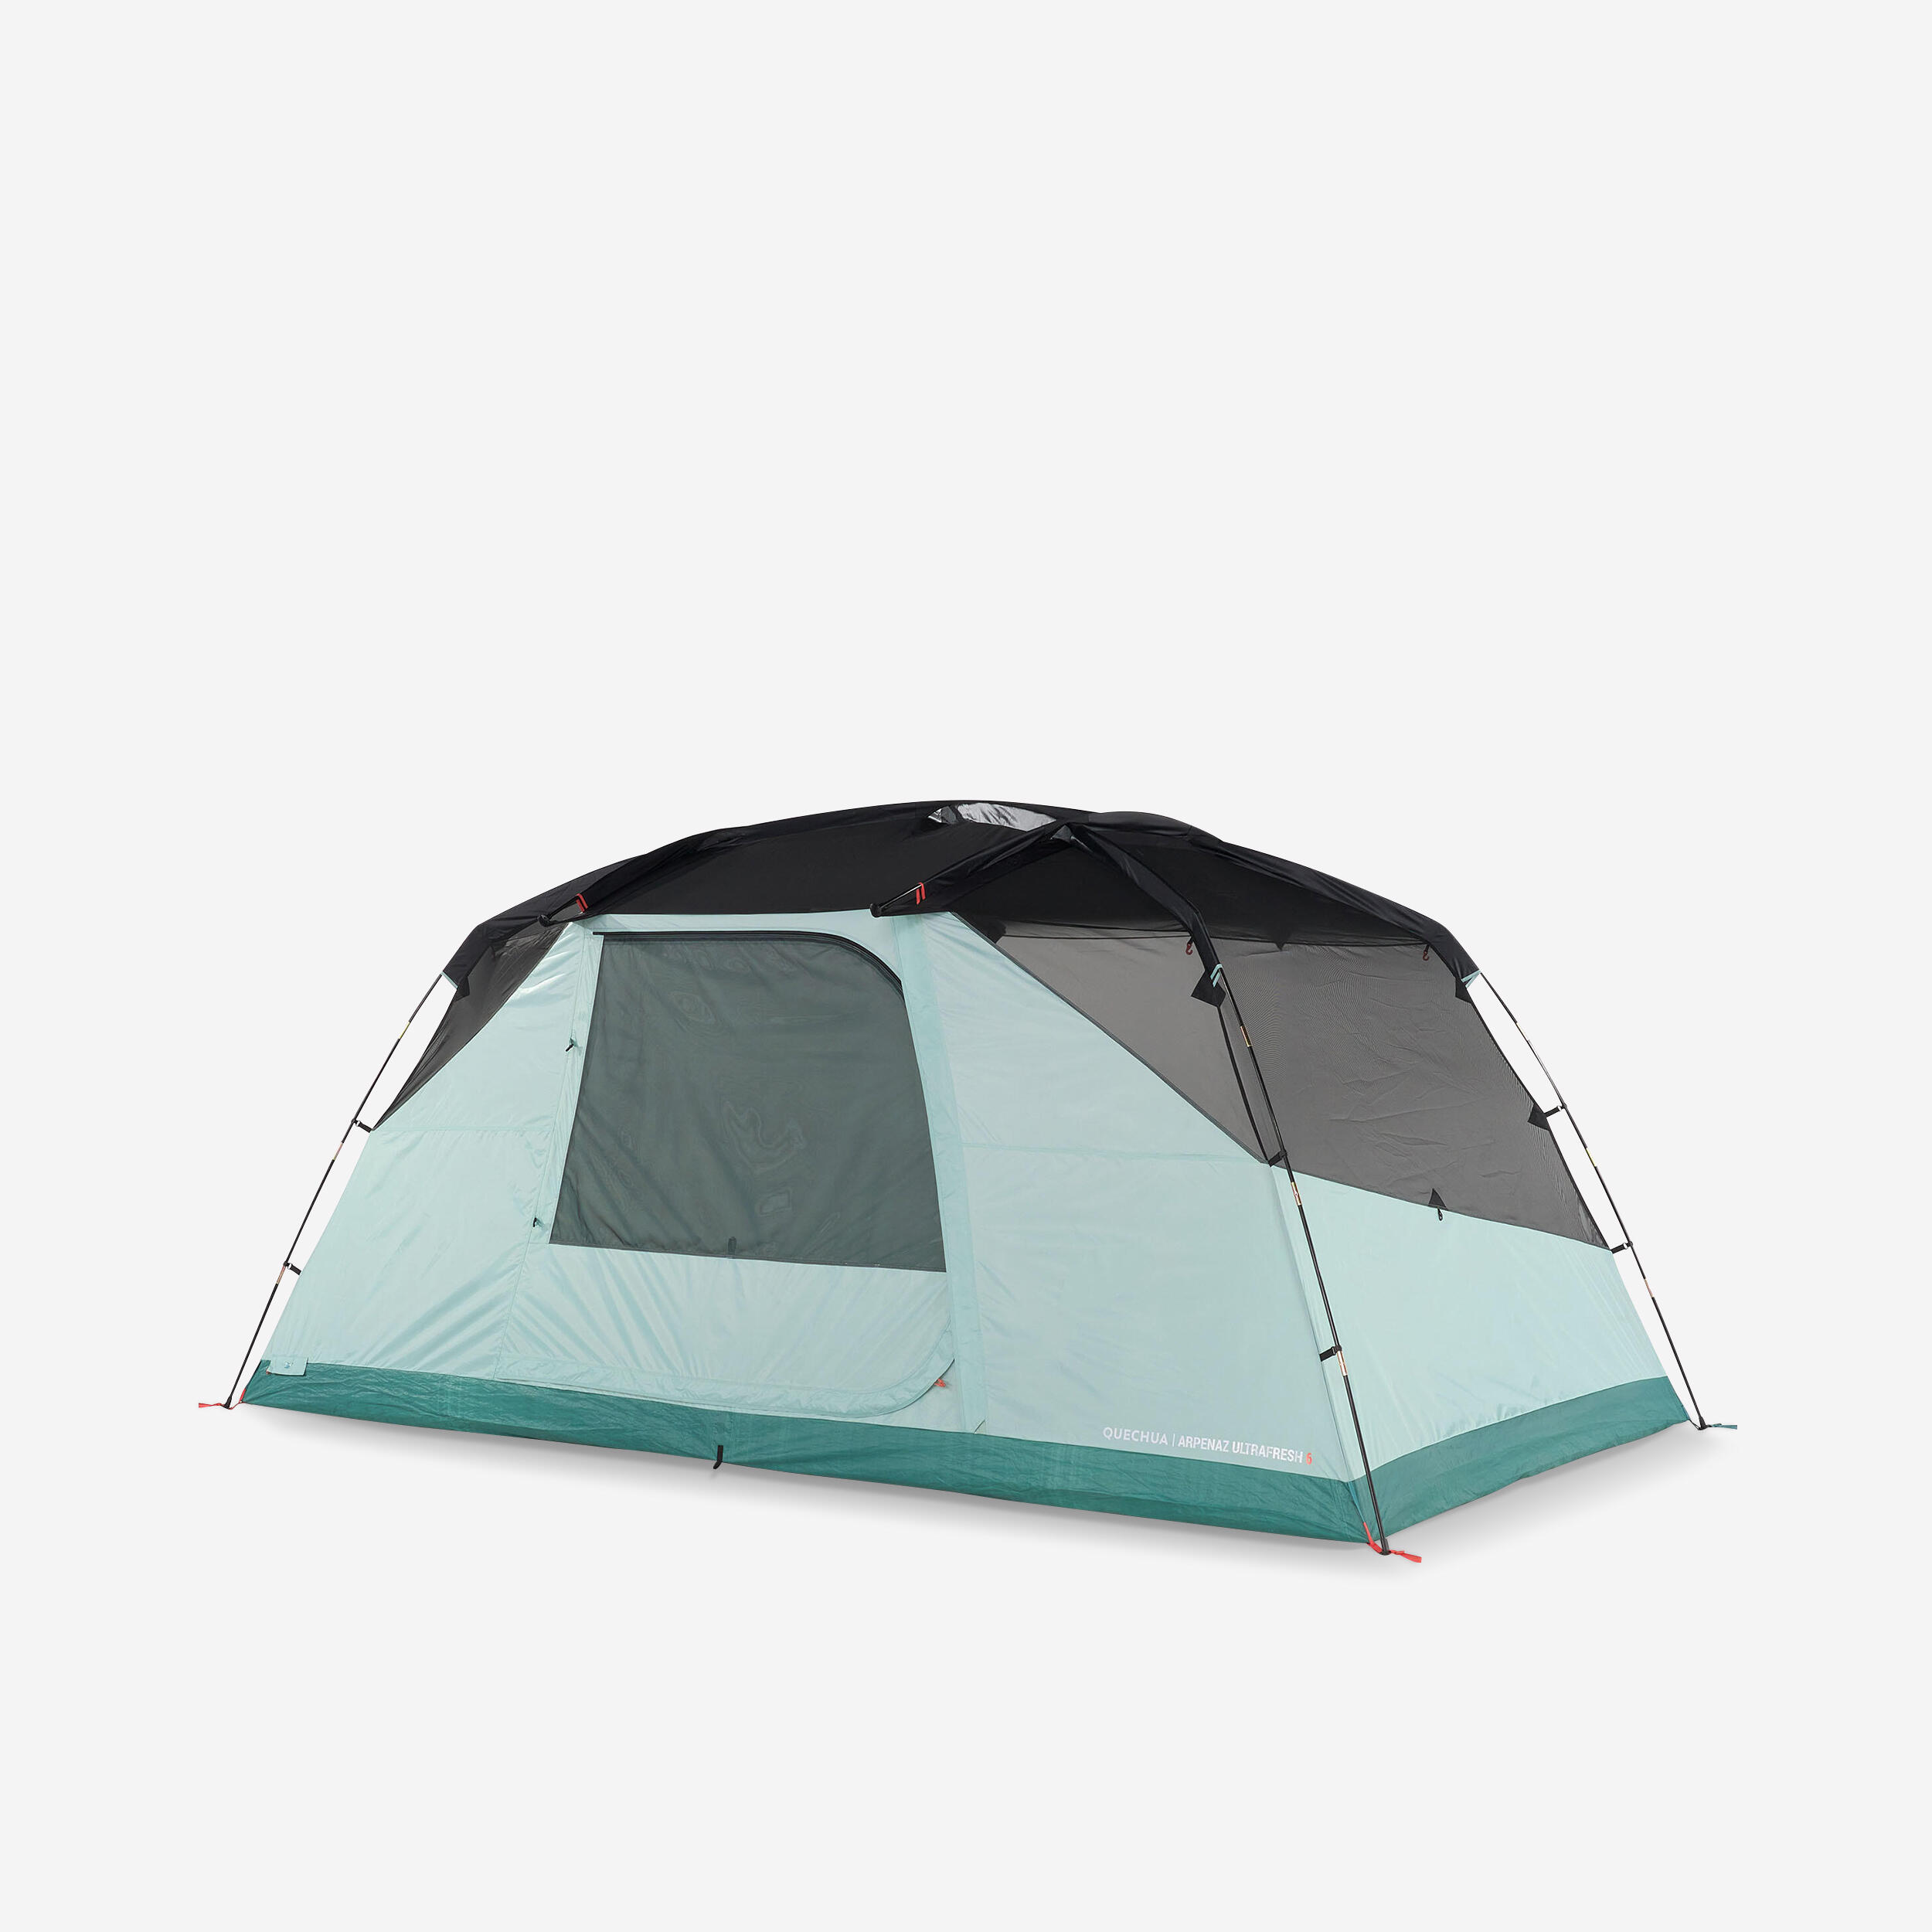 BEDROOM - SPARE PART FOR THE ARPENAZ 6 ULTRAFRESH TENT 1/1